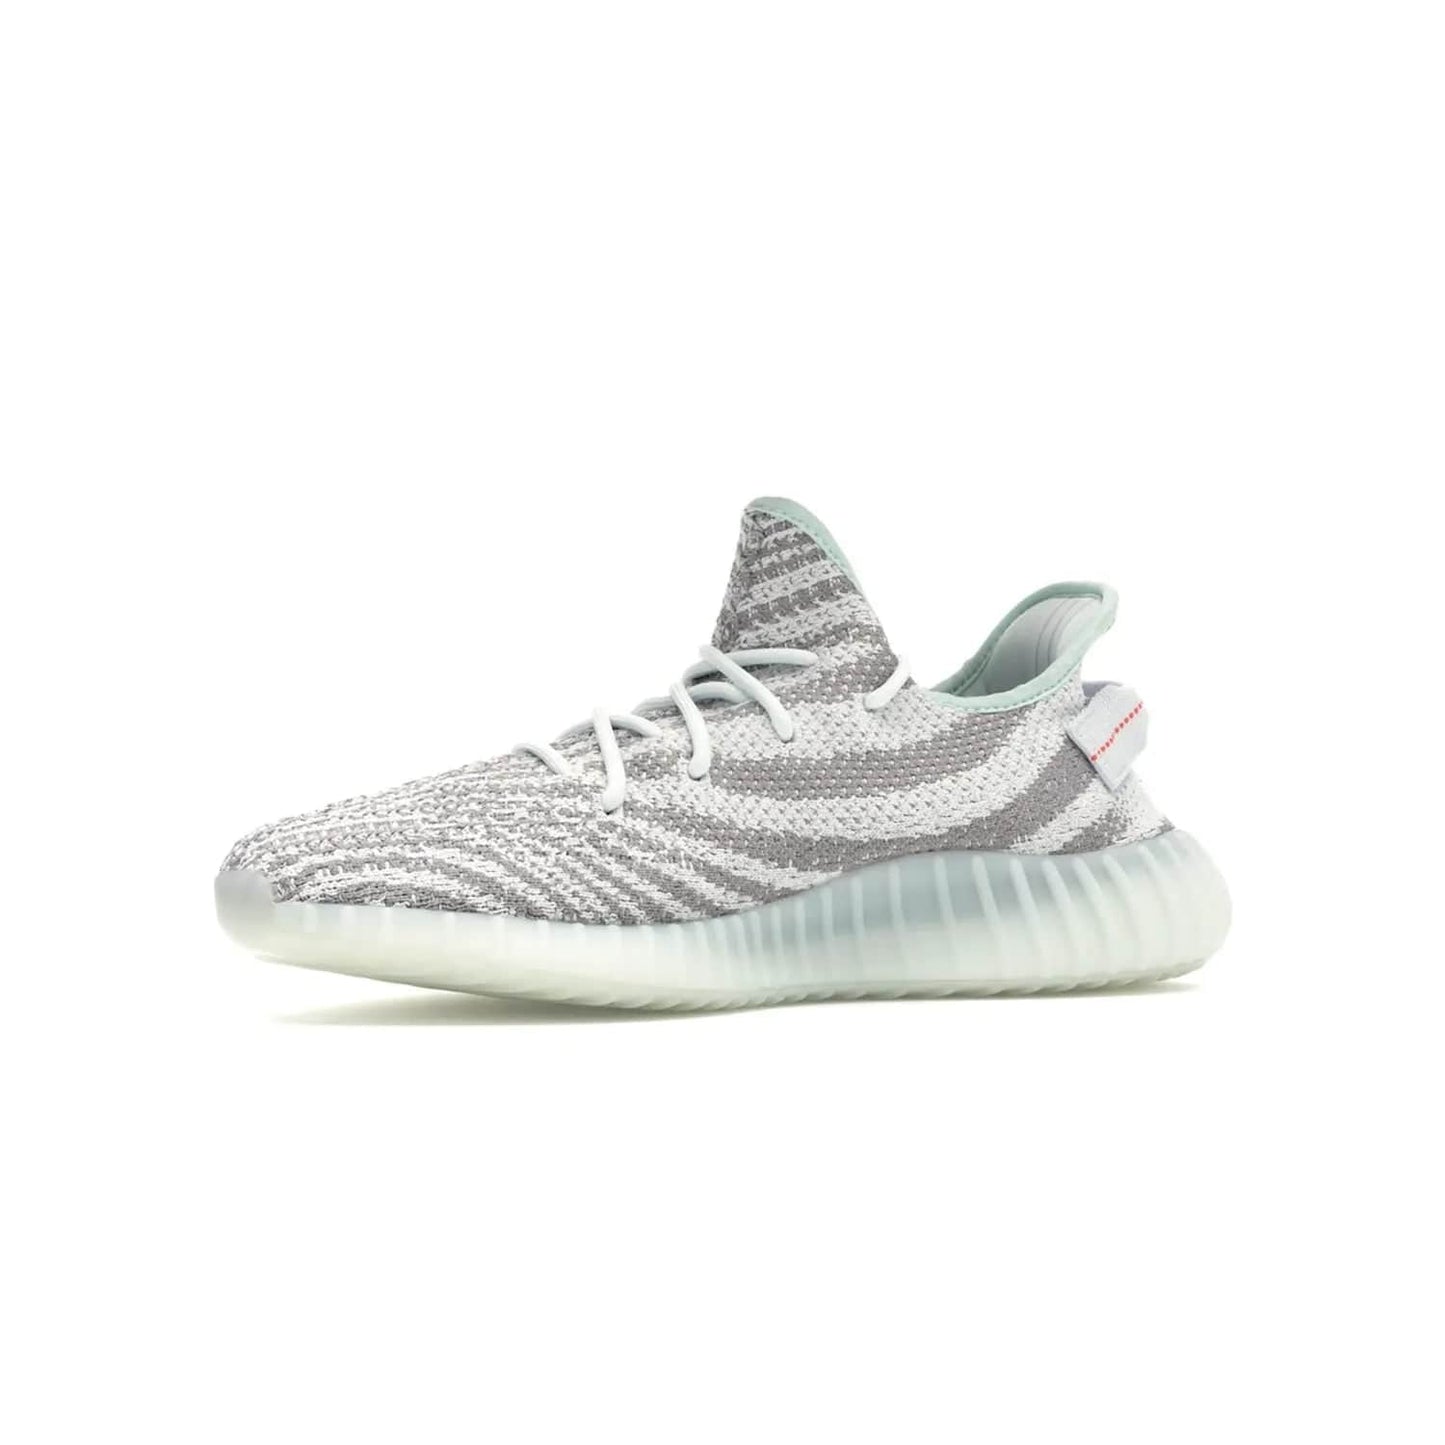 adidas Yeezy Boost 350 V2 Blue Tint - Image 17 - Only at www.BallersClubKickz.com - The adidas Yeezy Boost 350 V2 Blue Tint merges fashion and functionality with its Primeknit upper and Boost sole. Released in December 2017, this luxurious sneaker is perfect for making a stylish statement.